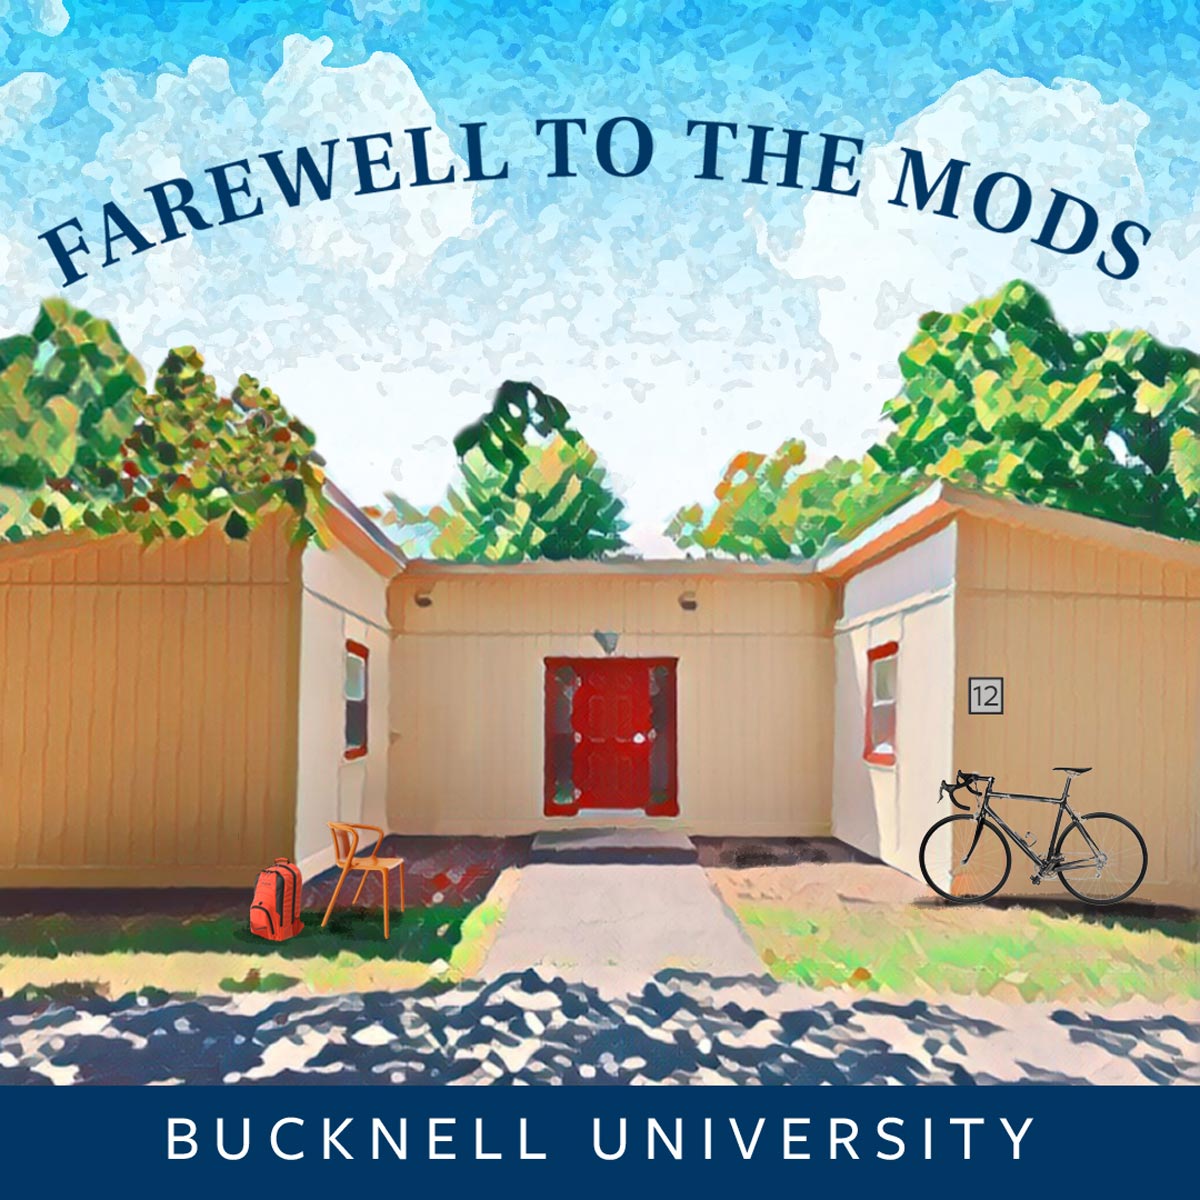 illustrative image of modular structures, text reads "Farewell to the Mods"